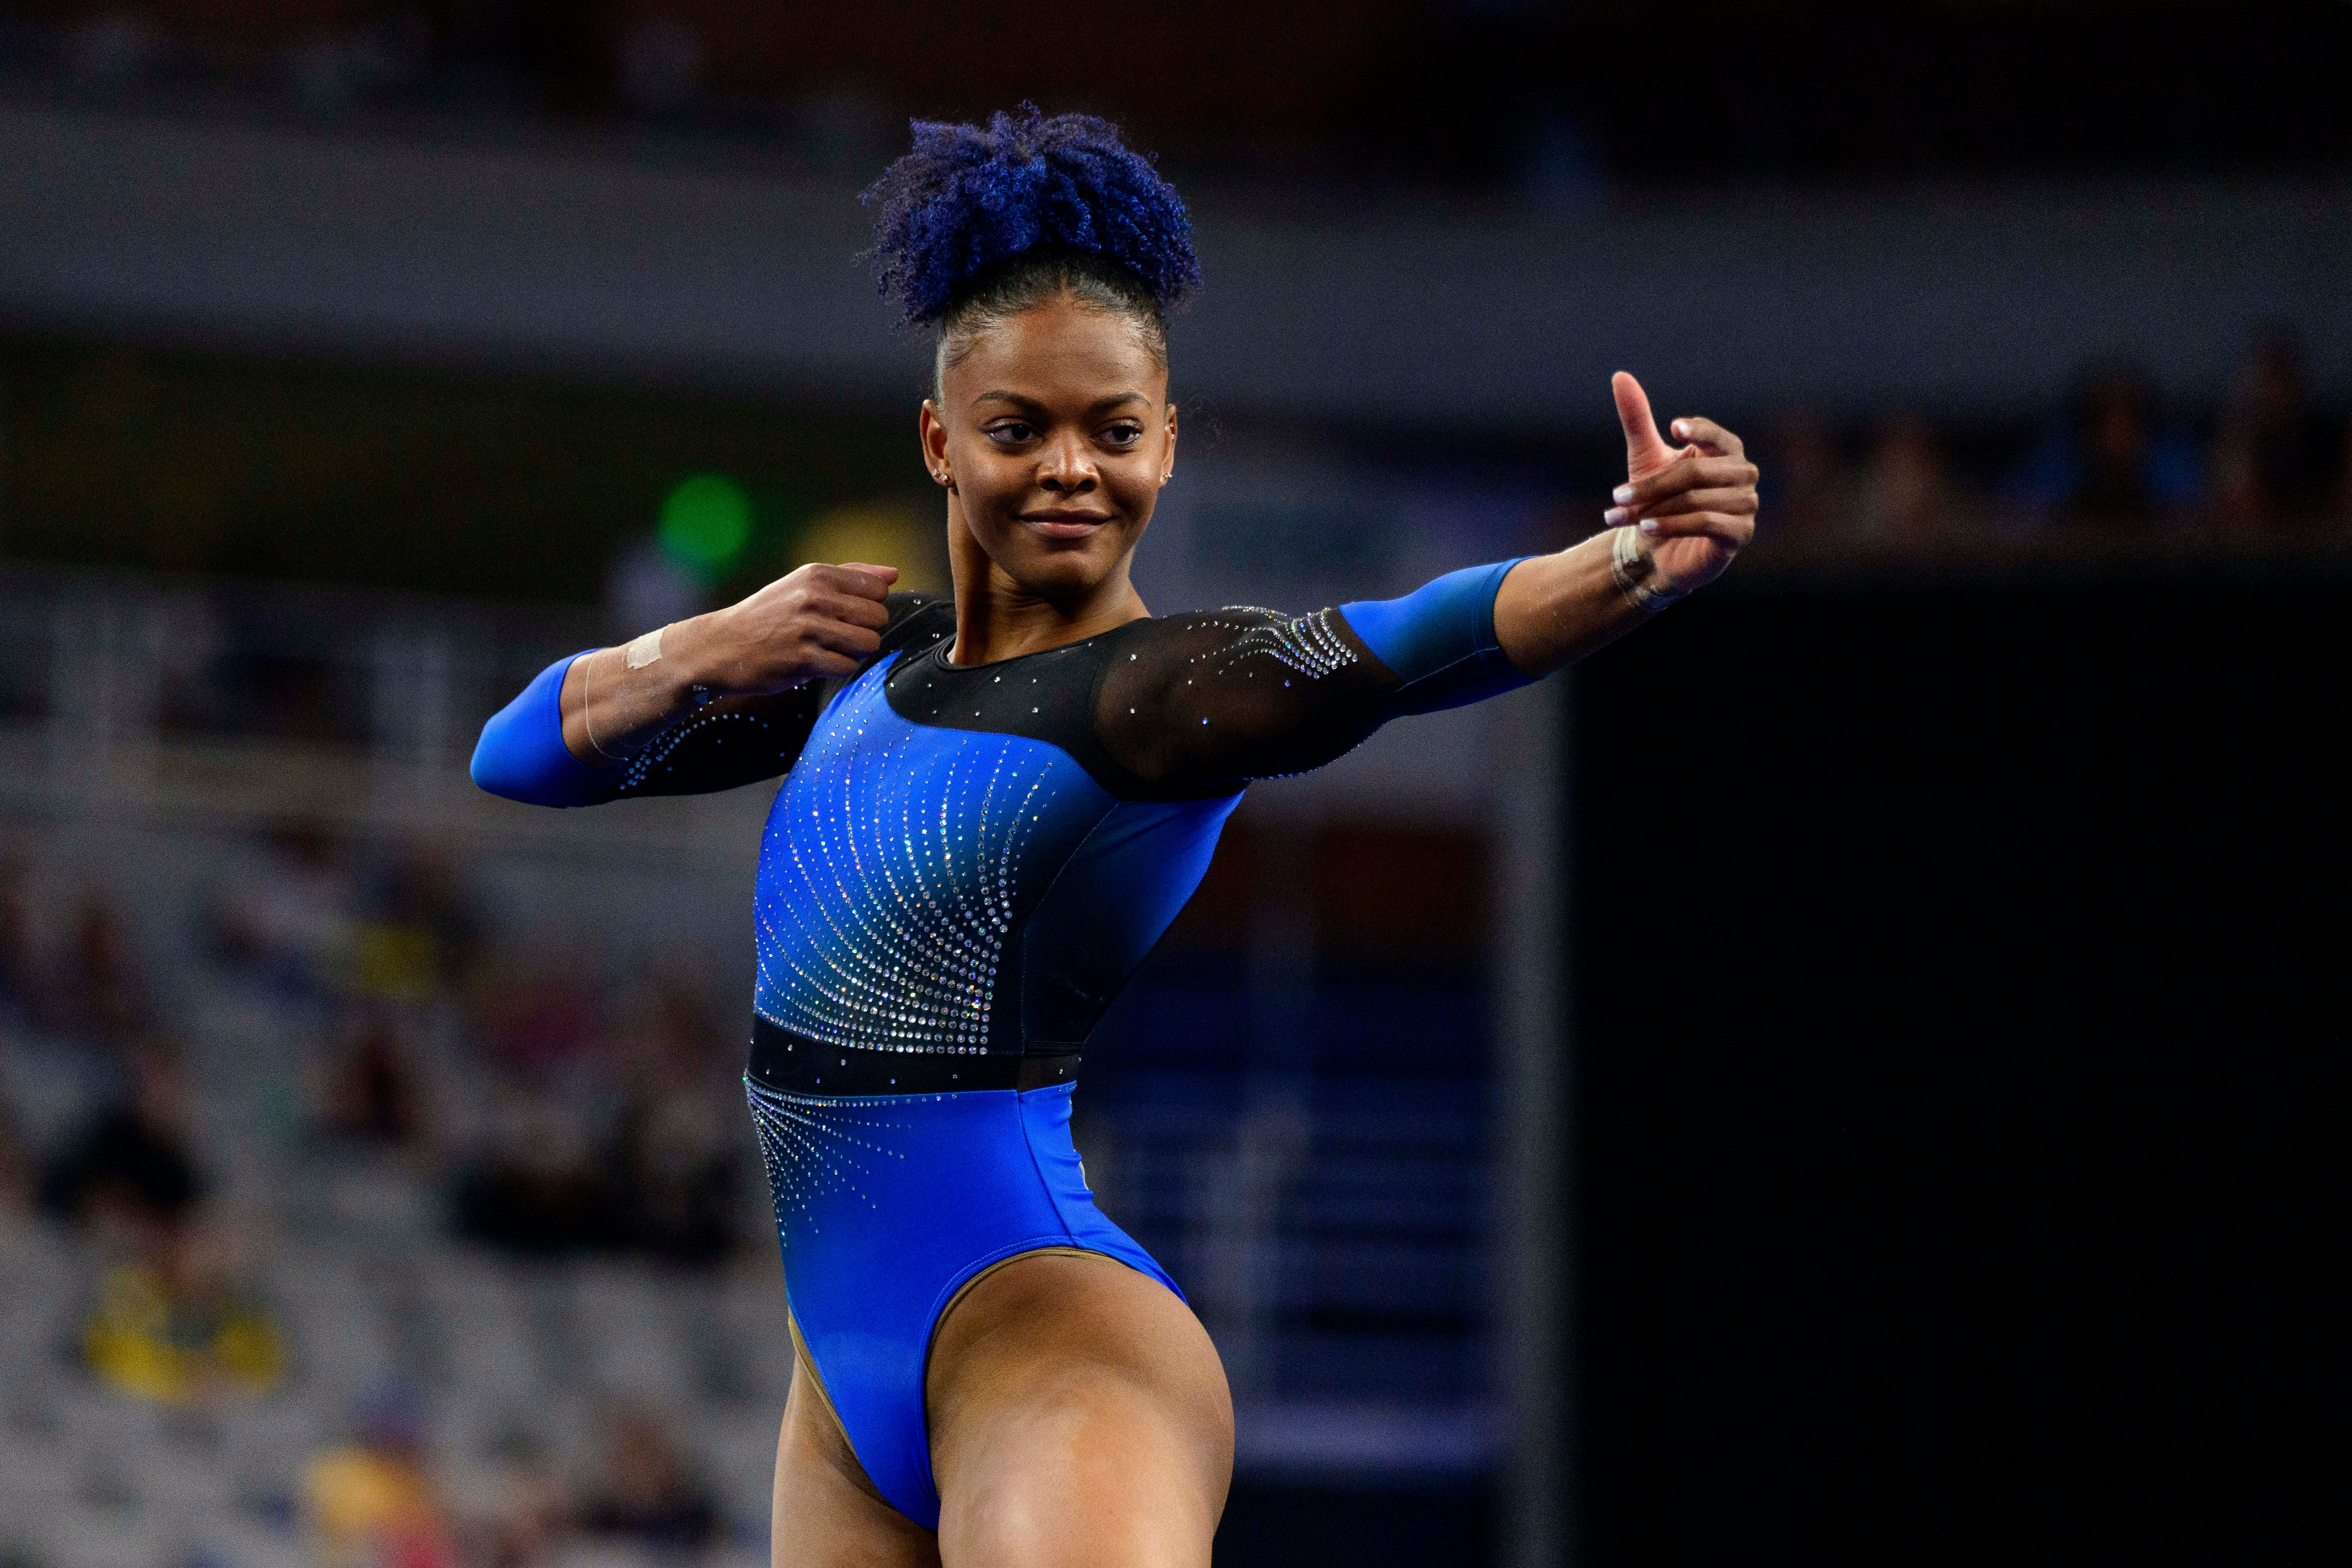 Apr 14, 2022; Fort Worth, TX, USA; University of Florida gymnast Trinity Thomas performs on floor during the session two semi finals at Dickies Arena. Mandatory